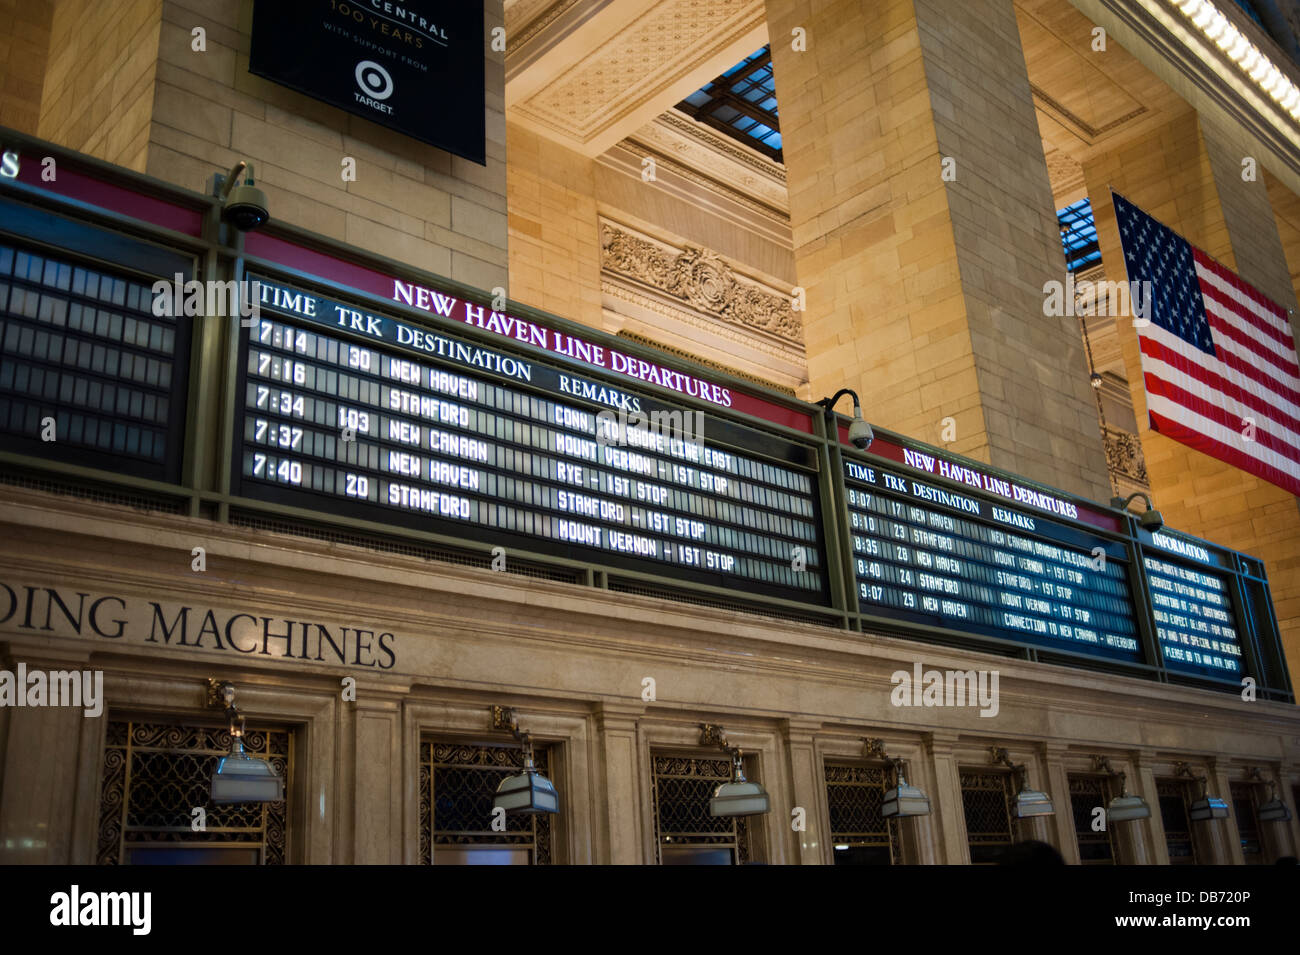 Grand Central Station arrivals marquee New York City Stock Photo